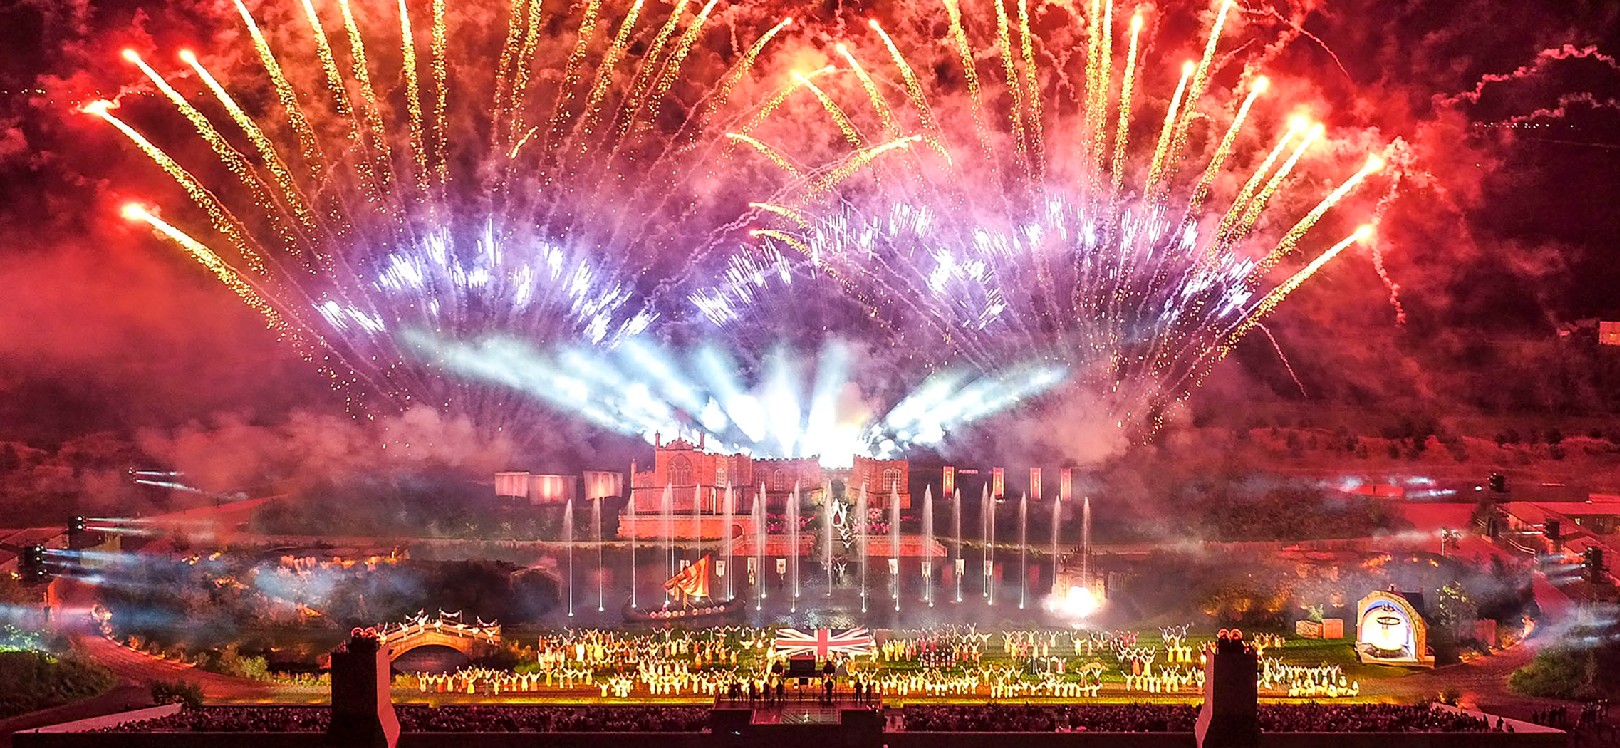 The fireworks finale at Kynren, An Epic Tale of England